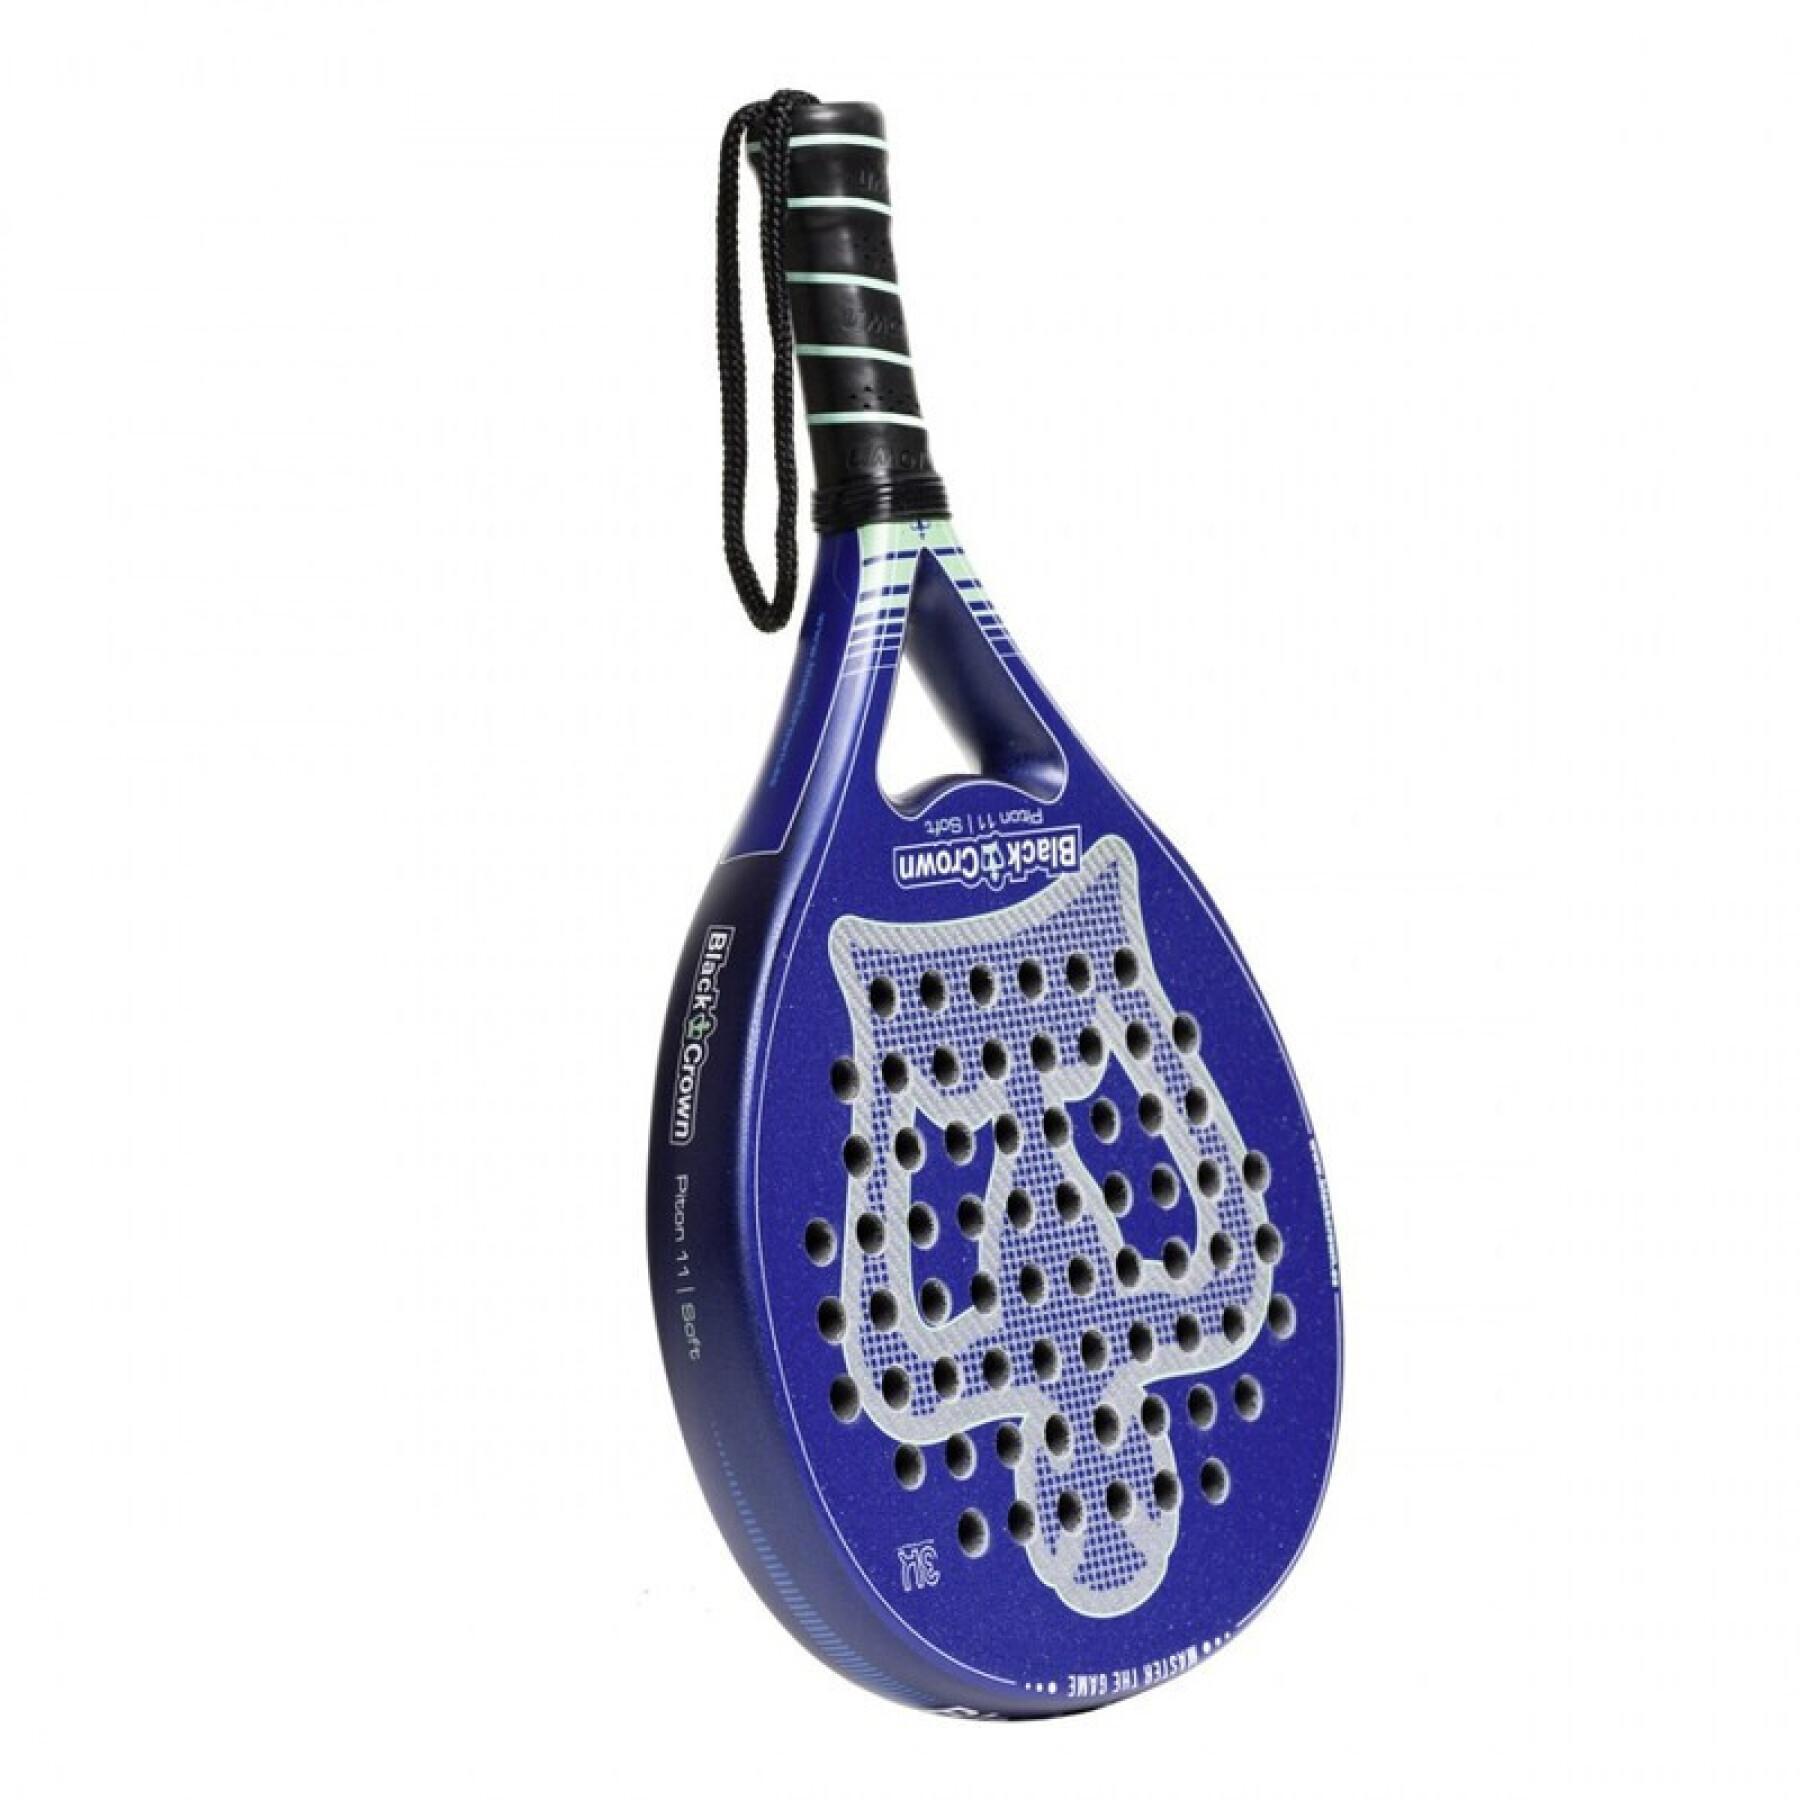 Racket from padel Black Crown Piton 11 Soft